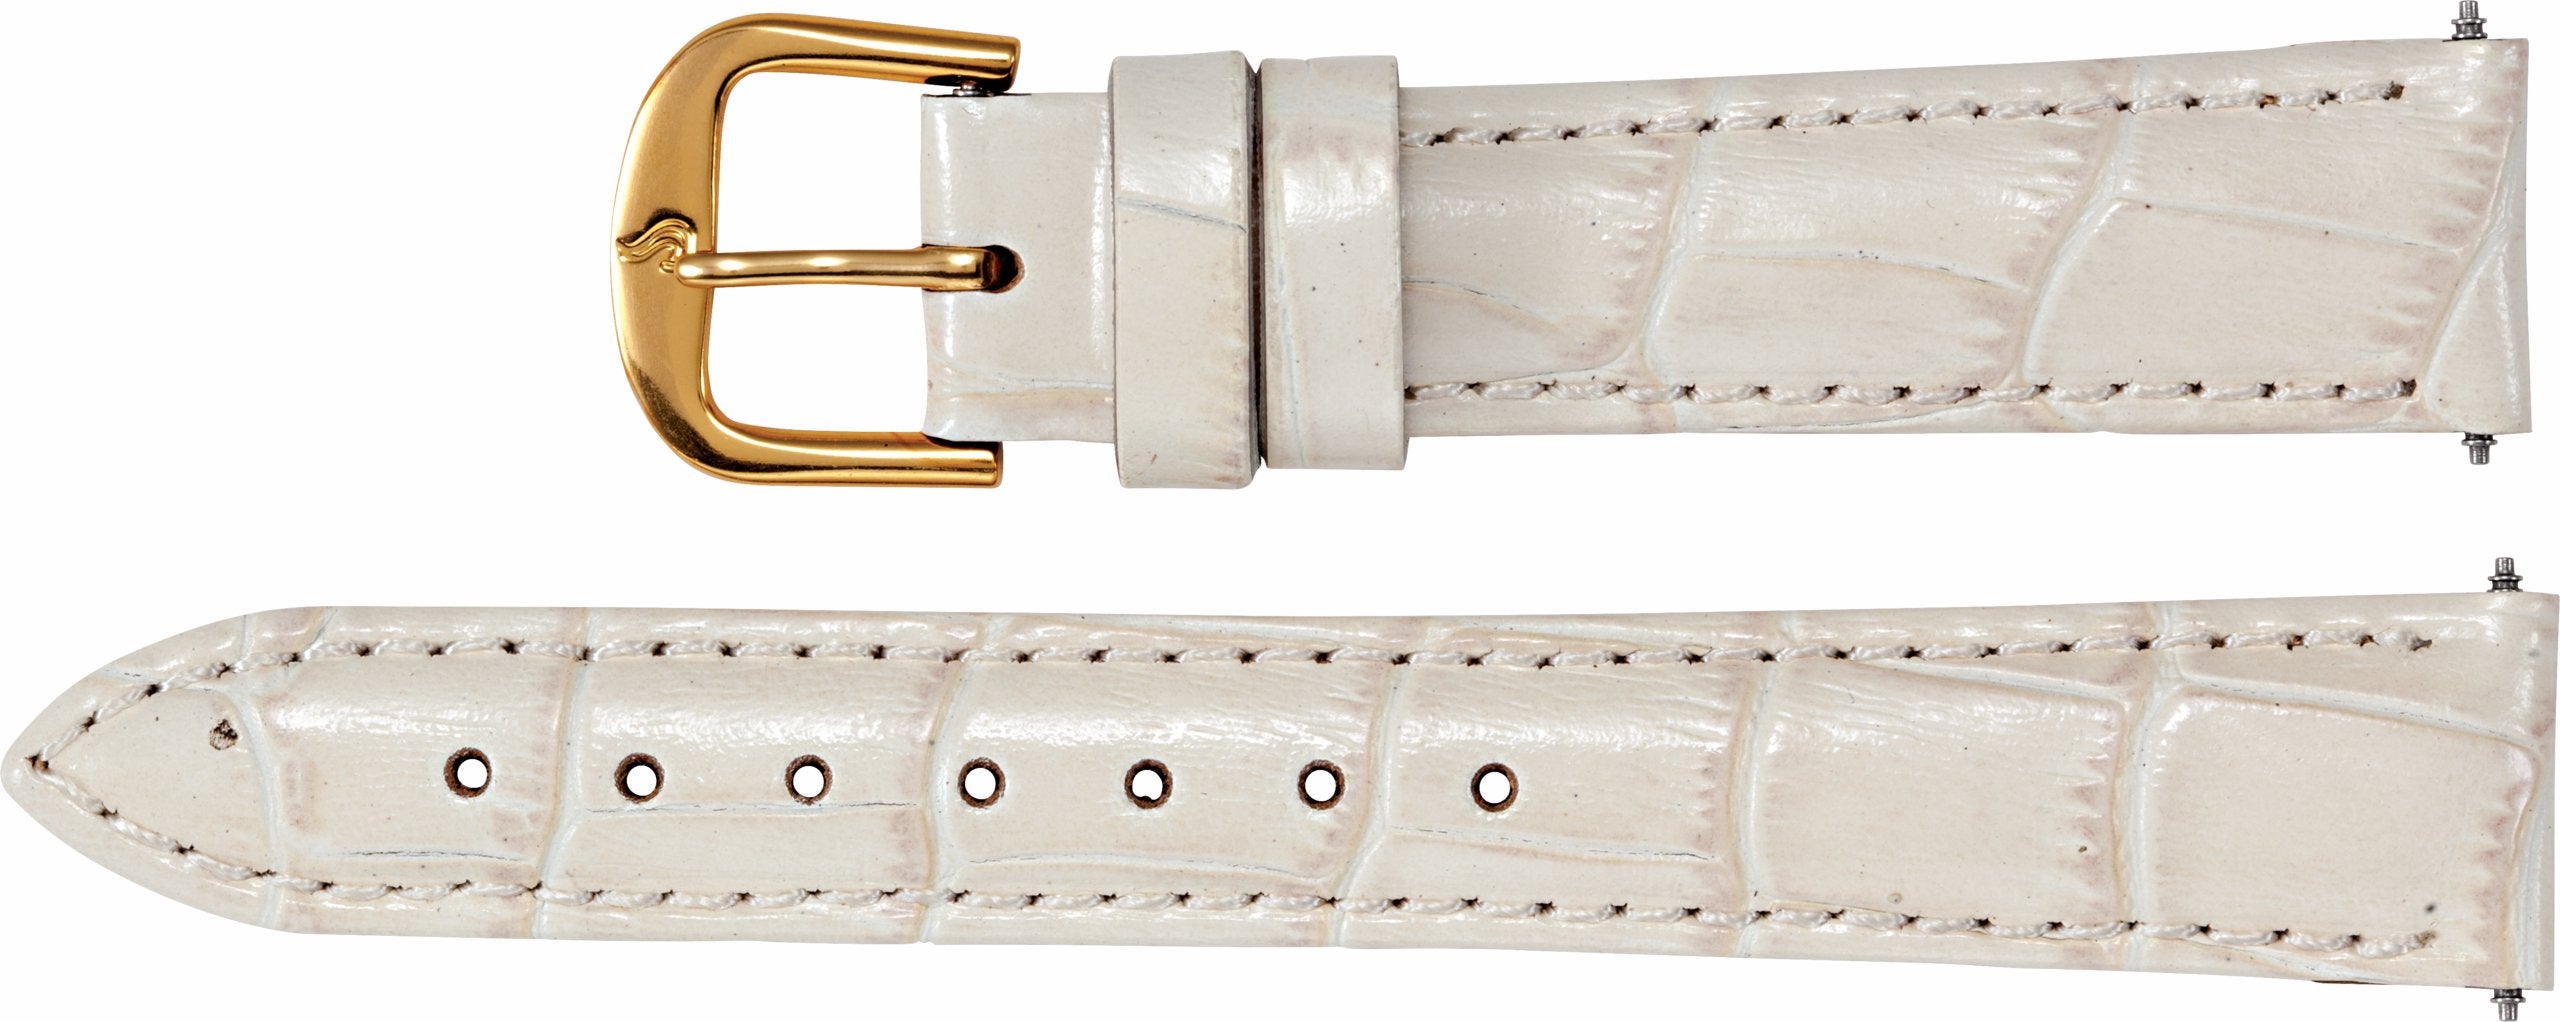 Ladies Leather Alligator Grain Padded Watch Band